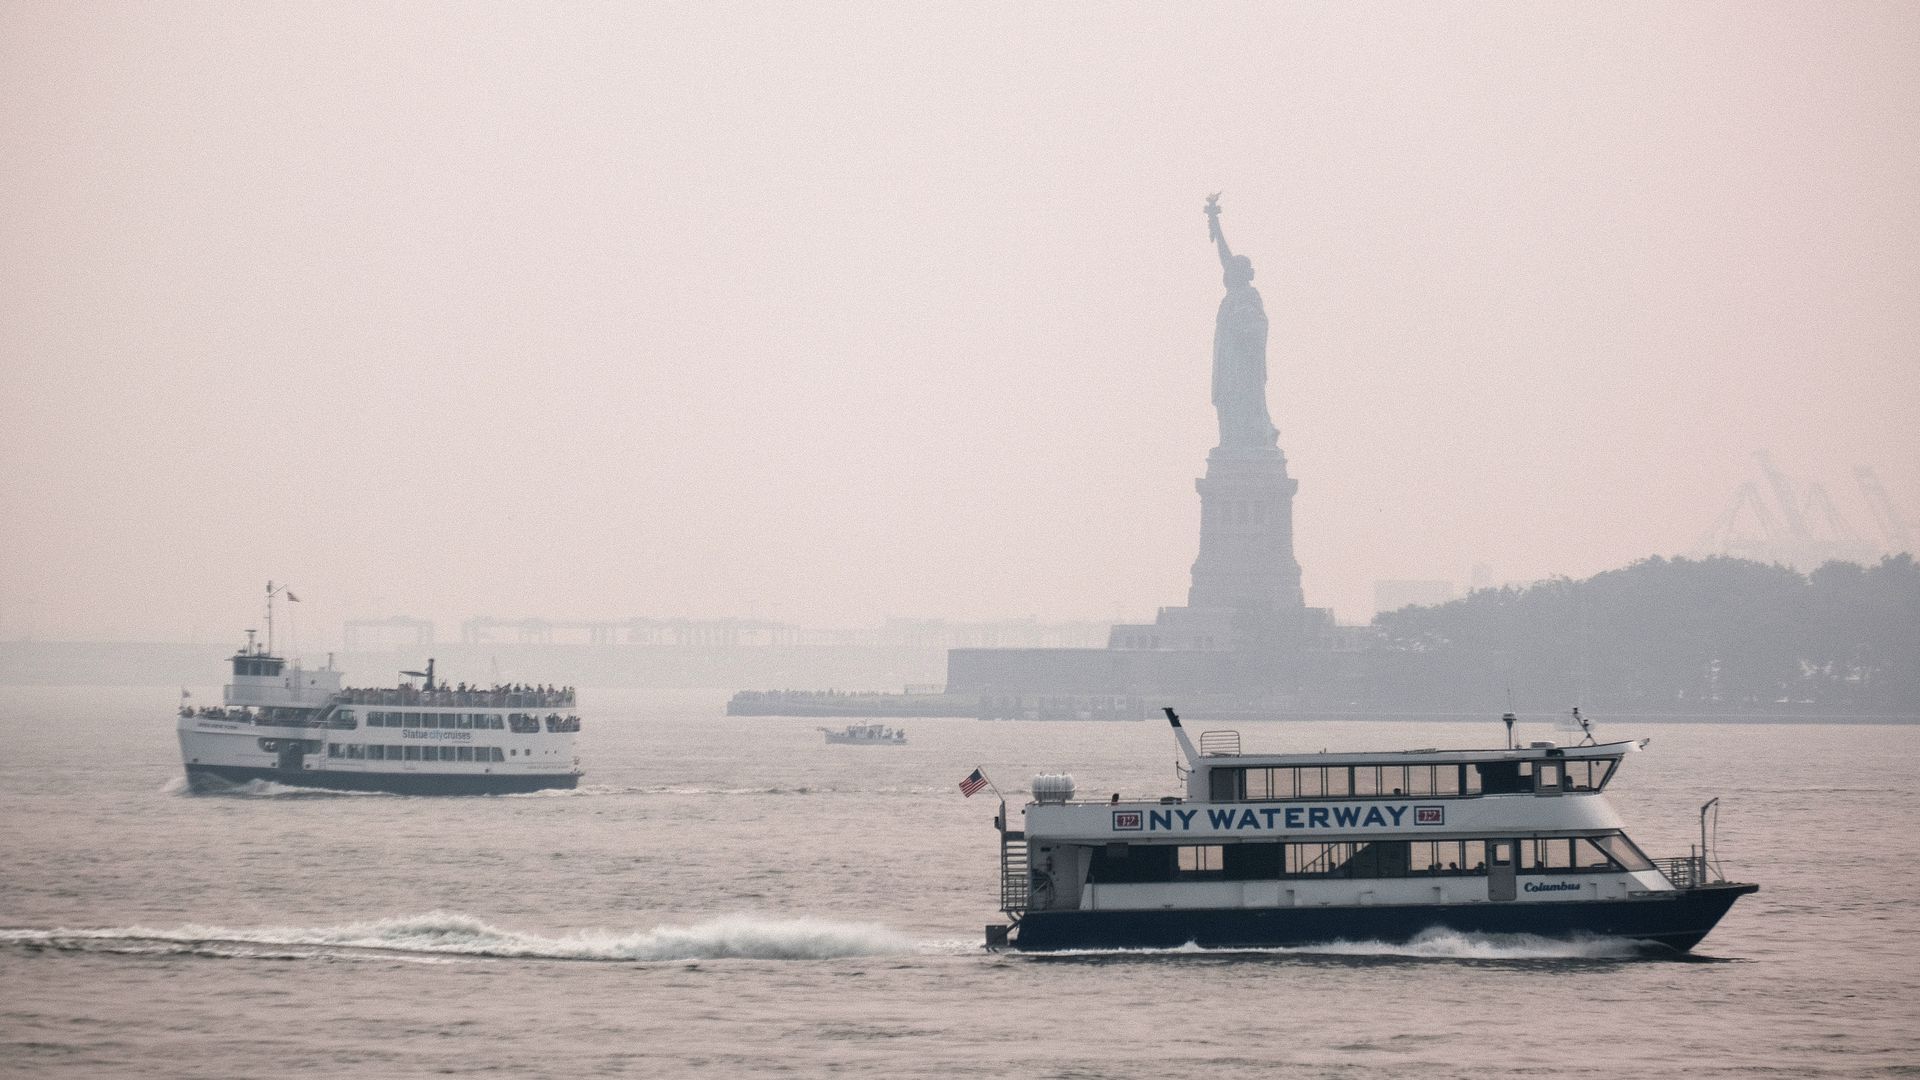 A hazy day with the Statue of Liberty. 